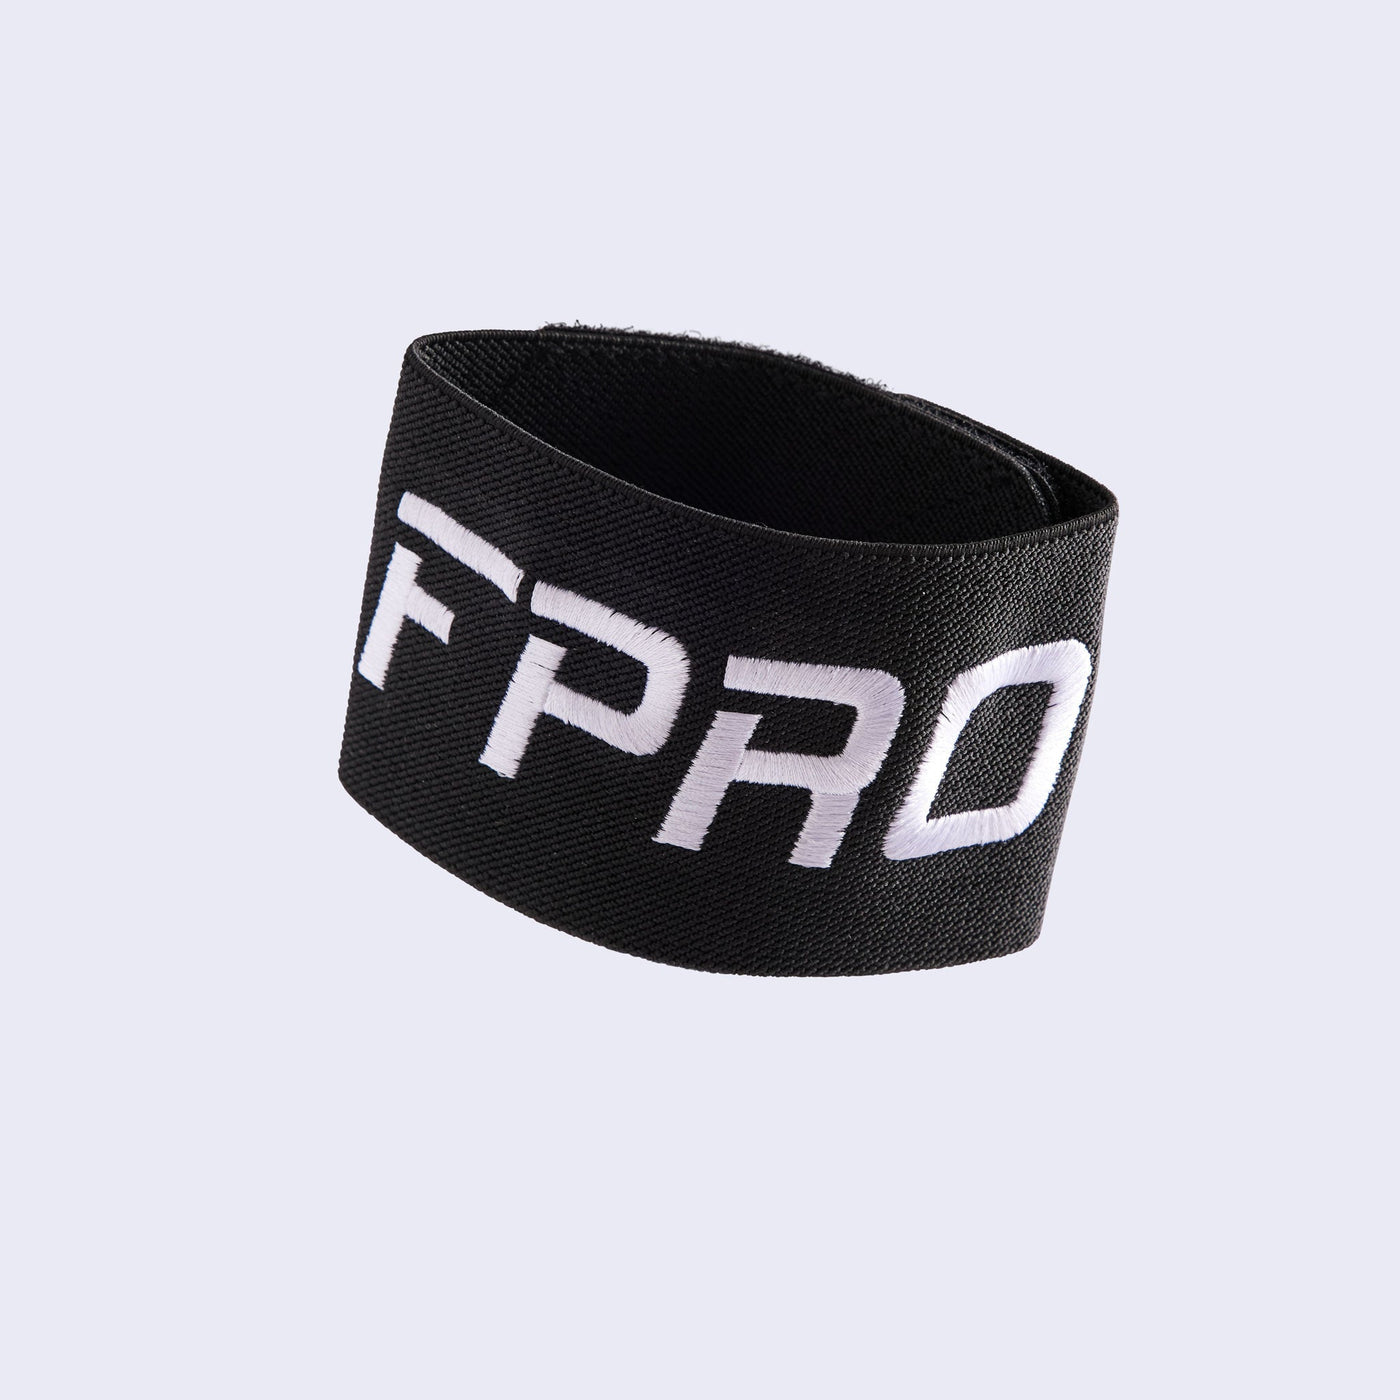 Supports de protège-tibia FPRO™